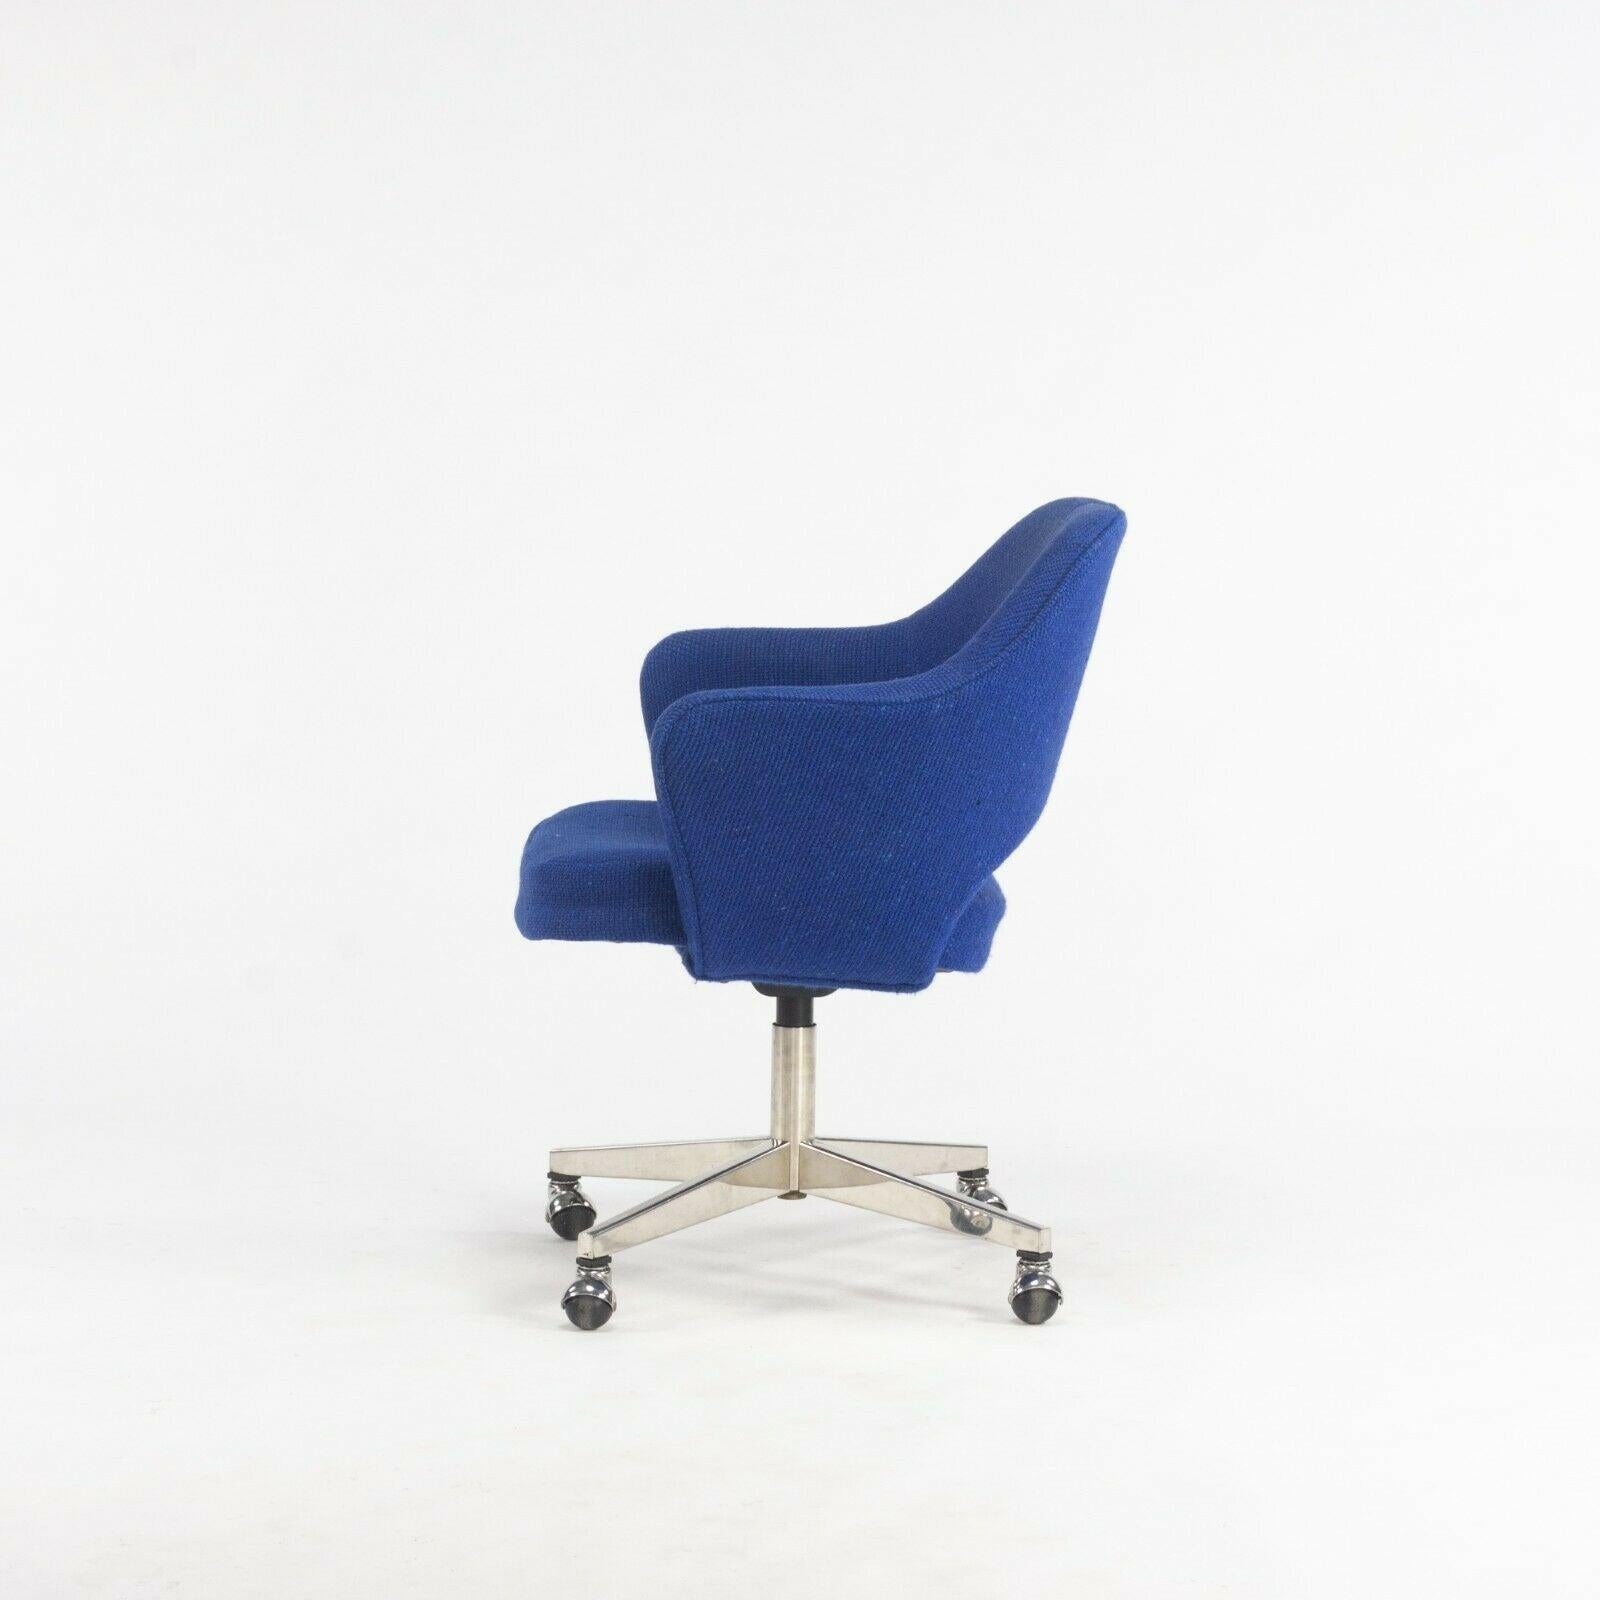 Metal 1974 Eero Saarinen for Knoll Rolling Executive Office Chair Original Blue Fabric For Sale